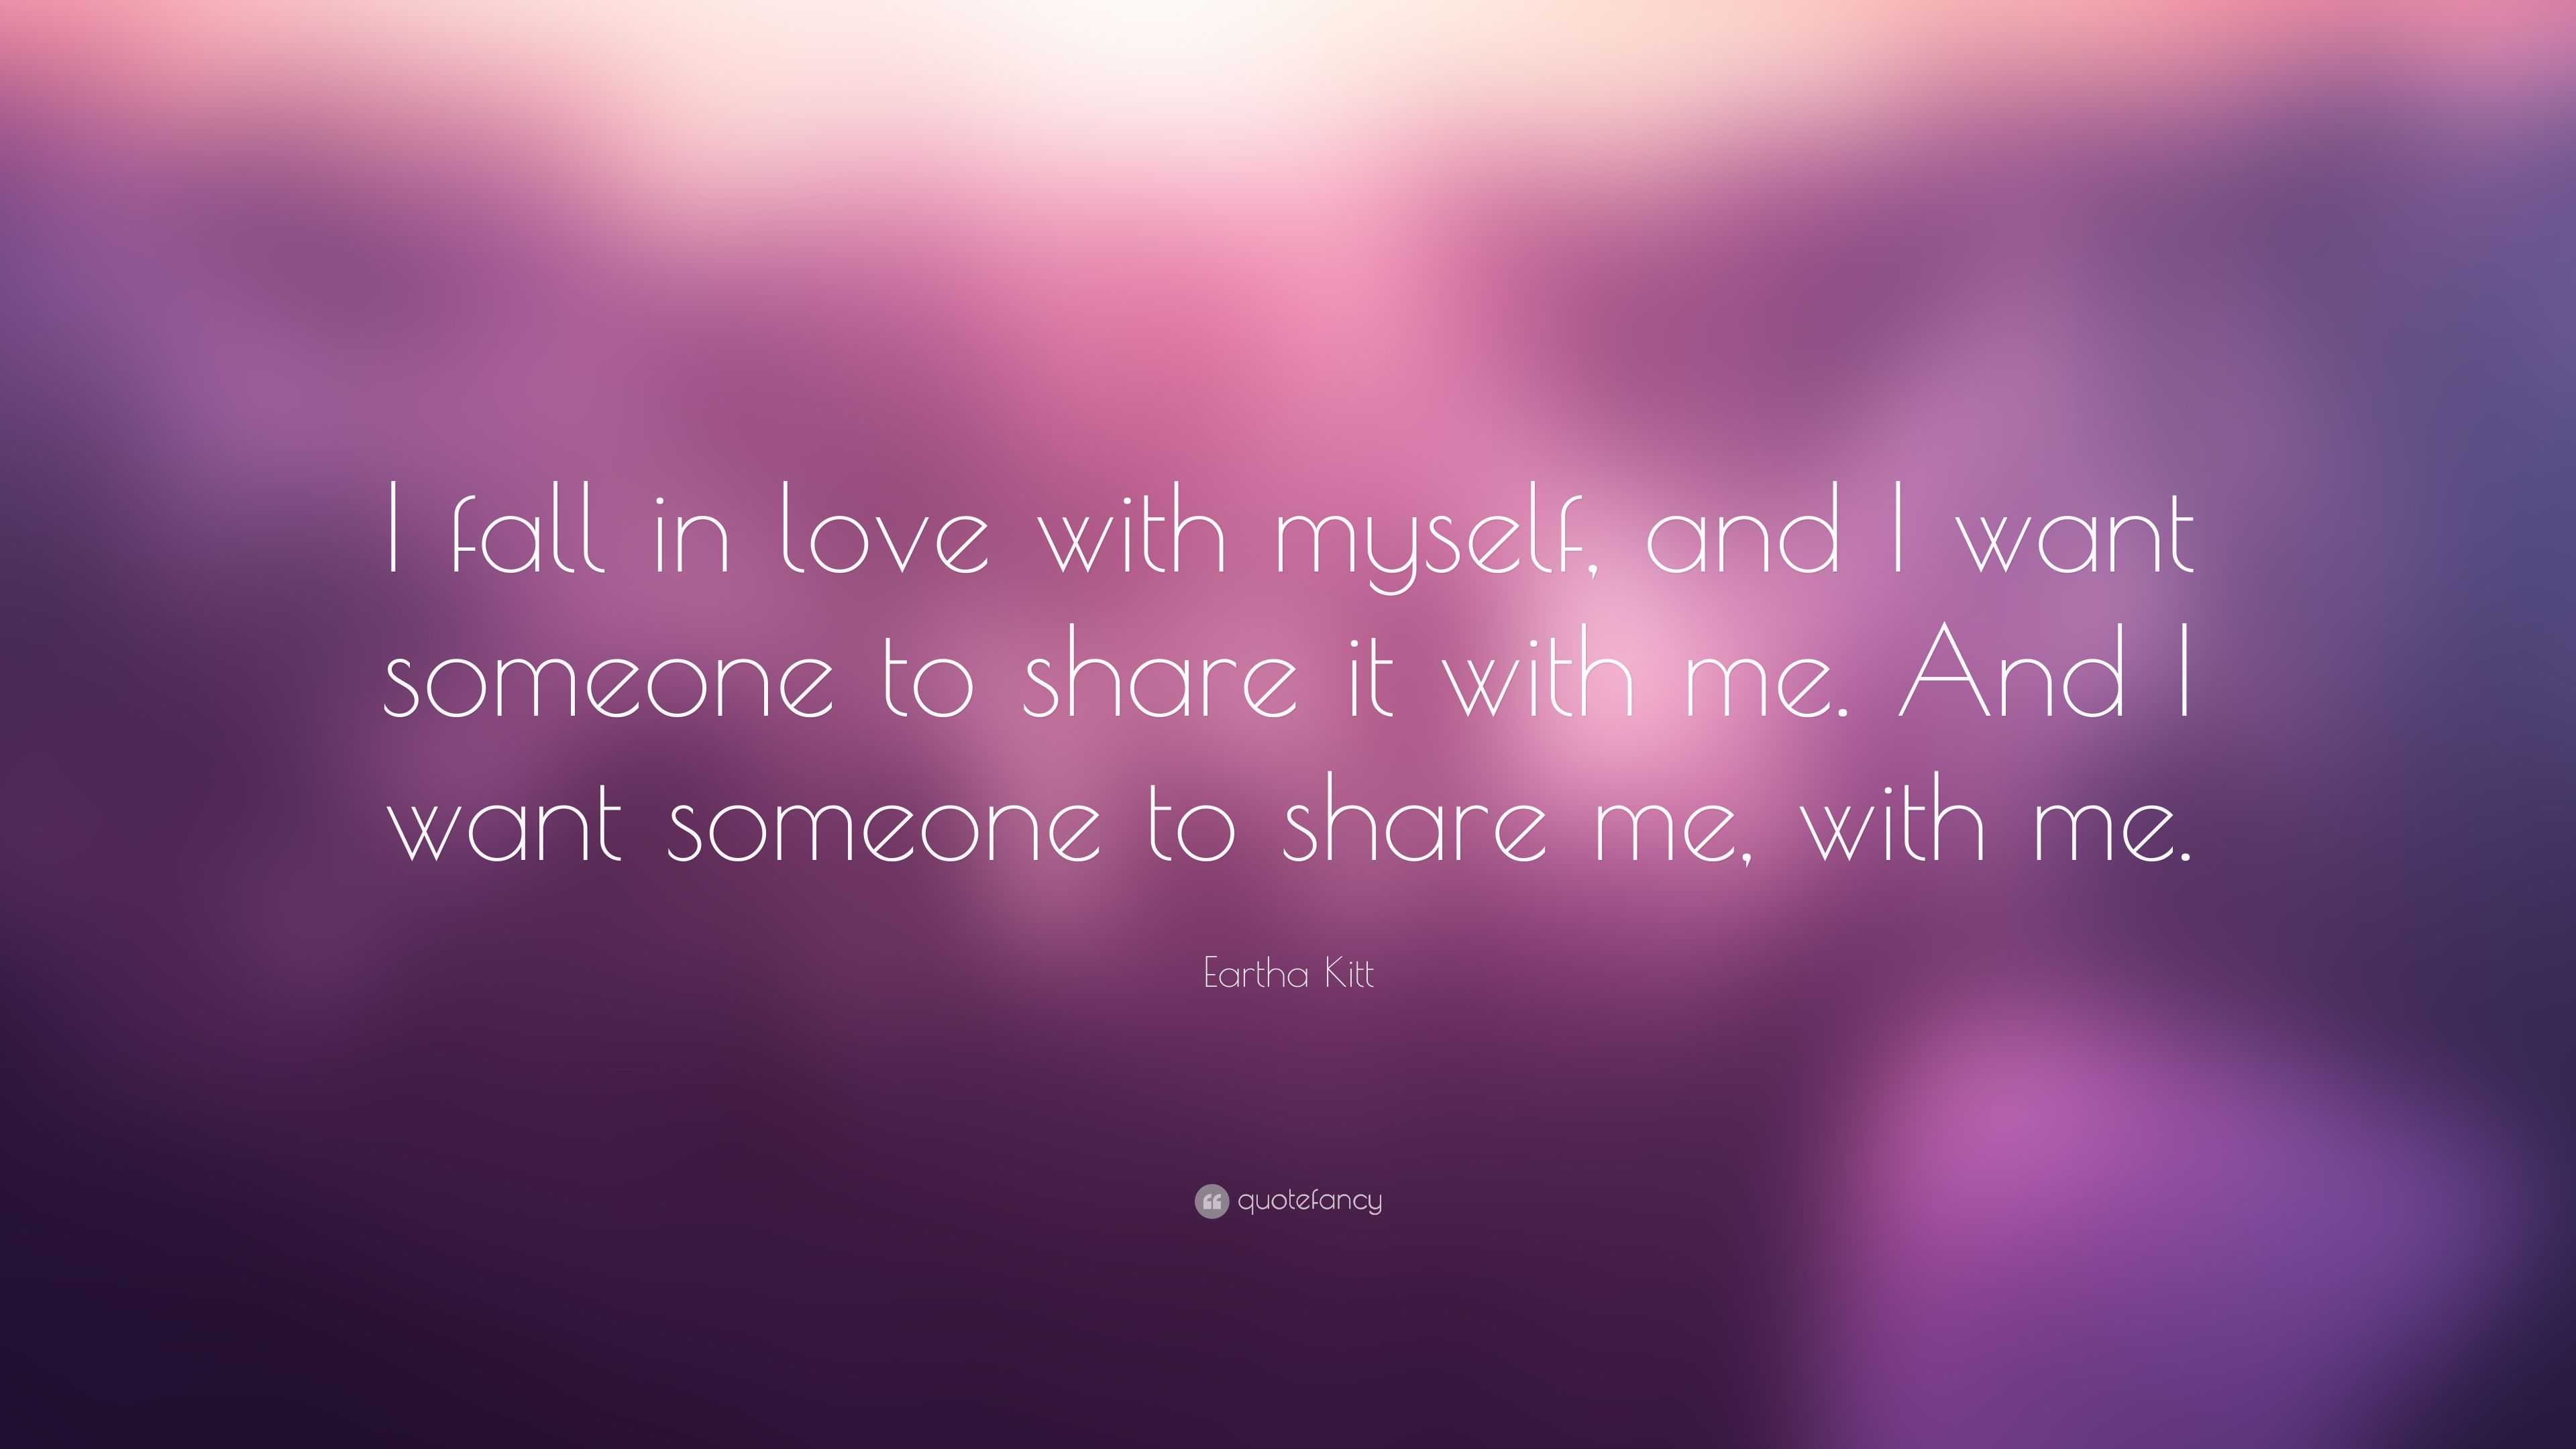 Eartha Kitt Quote “I fall in love with myself and I want someone